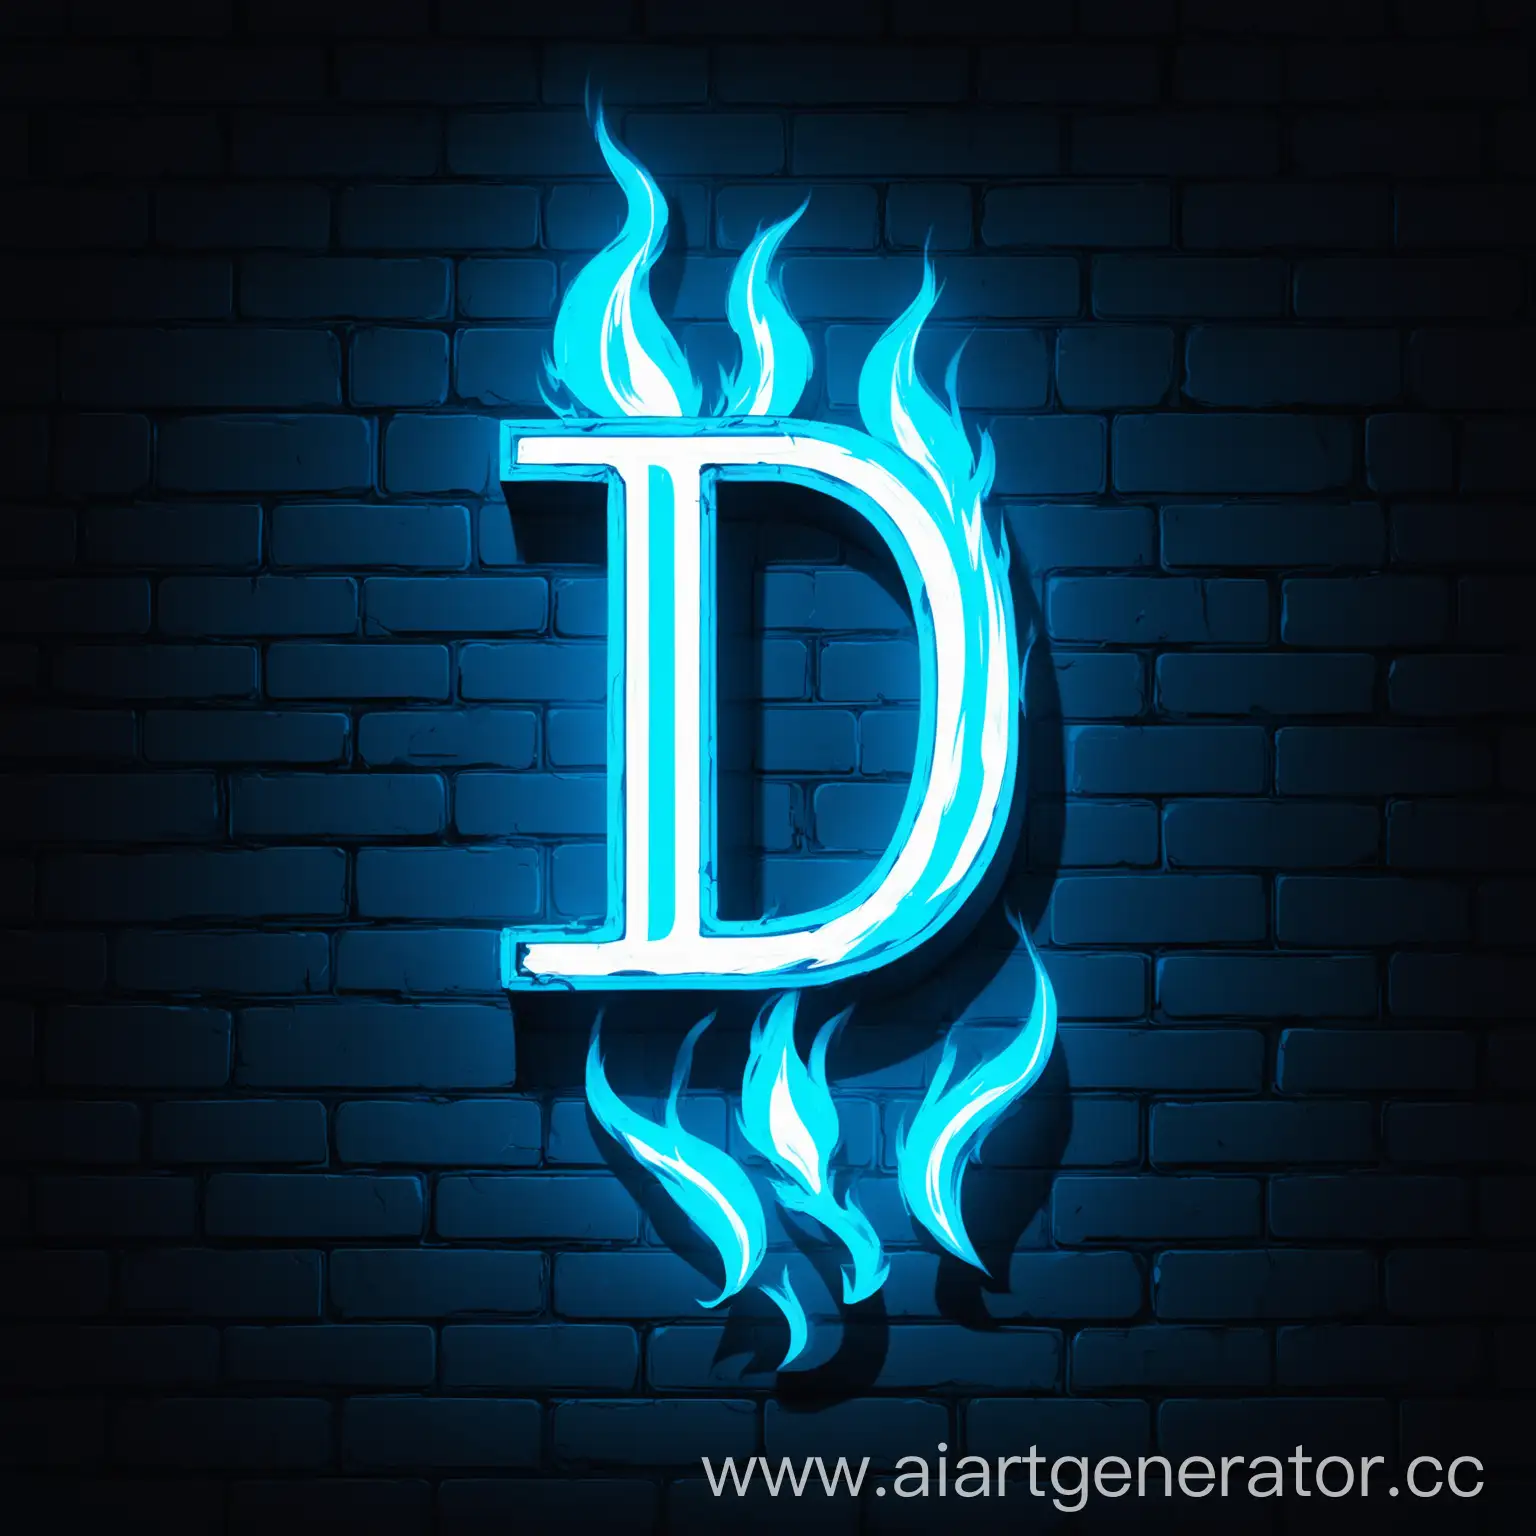 Neon-Blue-D-Letter-with-Glowing-White-Flame-on-Wall